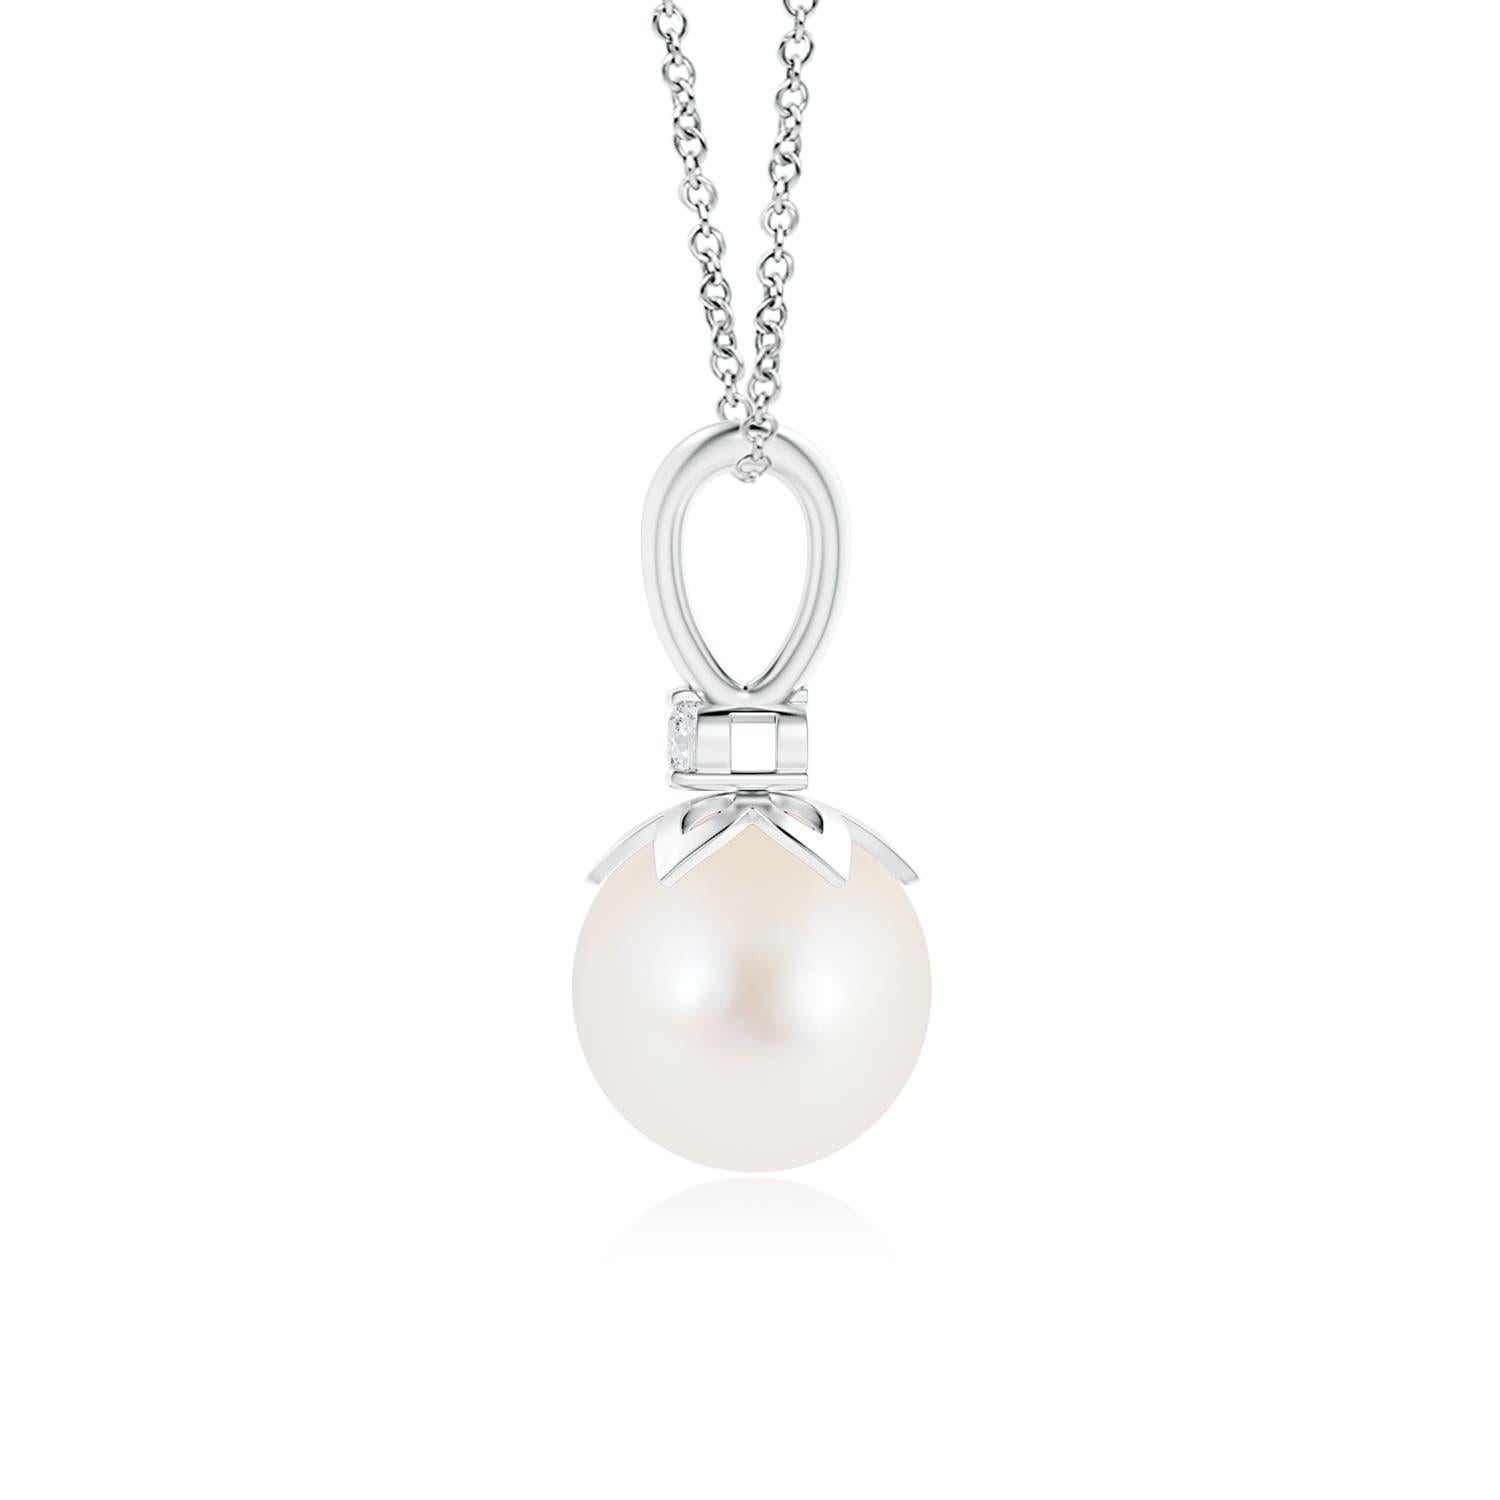 Hanging from a V-bale, the peg-set round Freshwater cultured pearl allures with its classic white color. Right below the bale sits a prong-set diamond accent that adds to the beauty of this drop pearl pendant. Be it your formal or casual outfits,